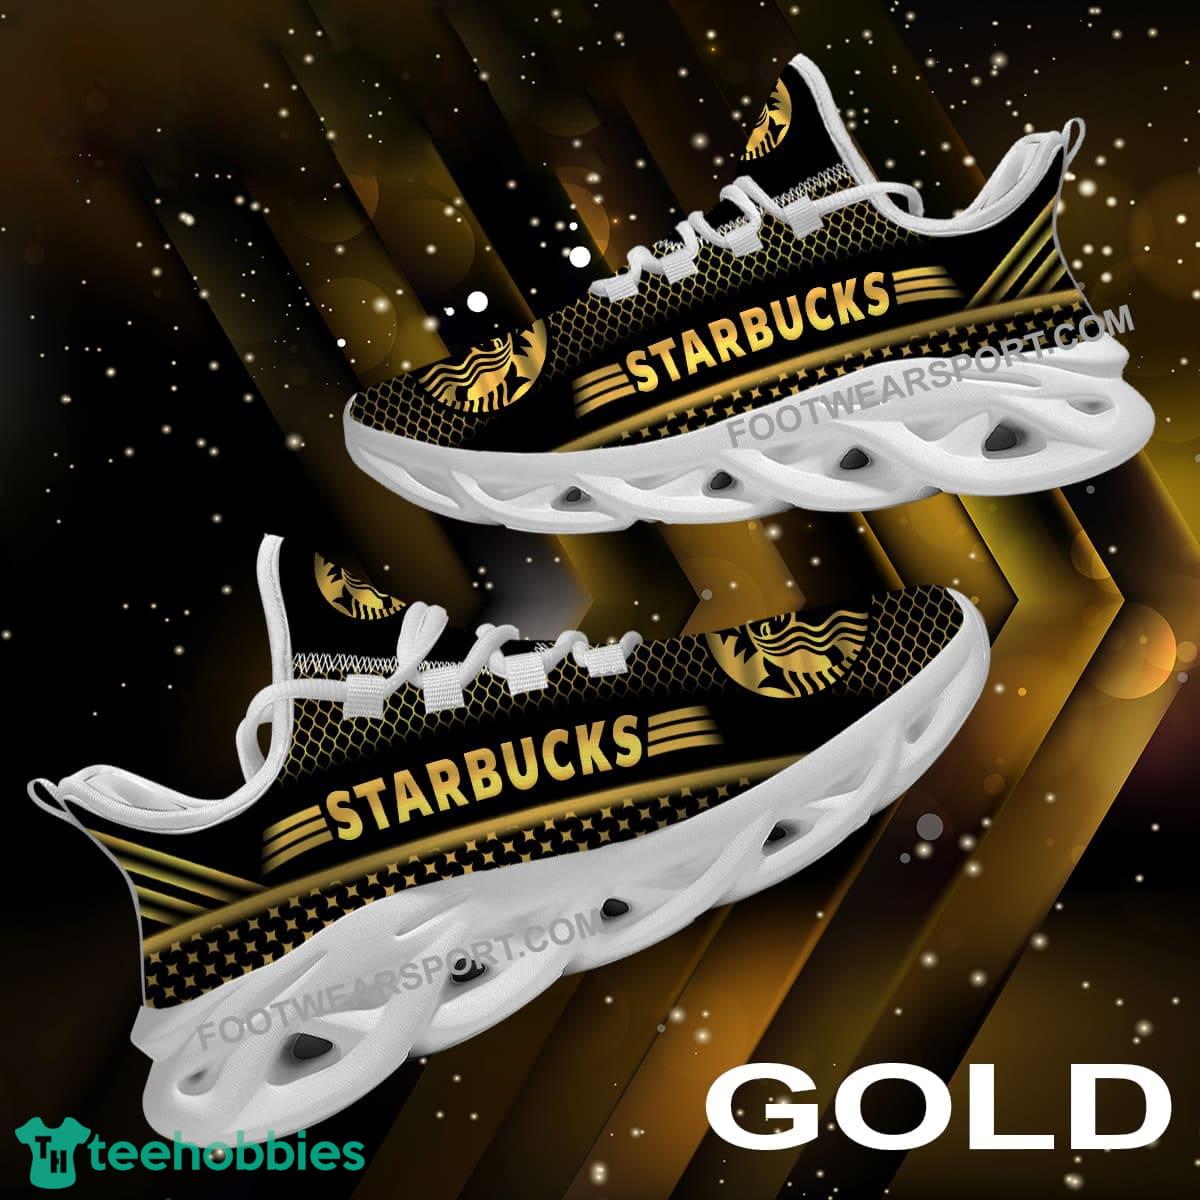 Starbucks Max Soul Shoes Gold Chunky Sneaker Modern For Fans Gift - Starbucks Max Soul Shoes Gold Chunky Sneaker Modern For Fans Gift